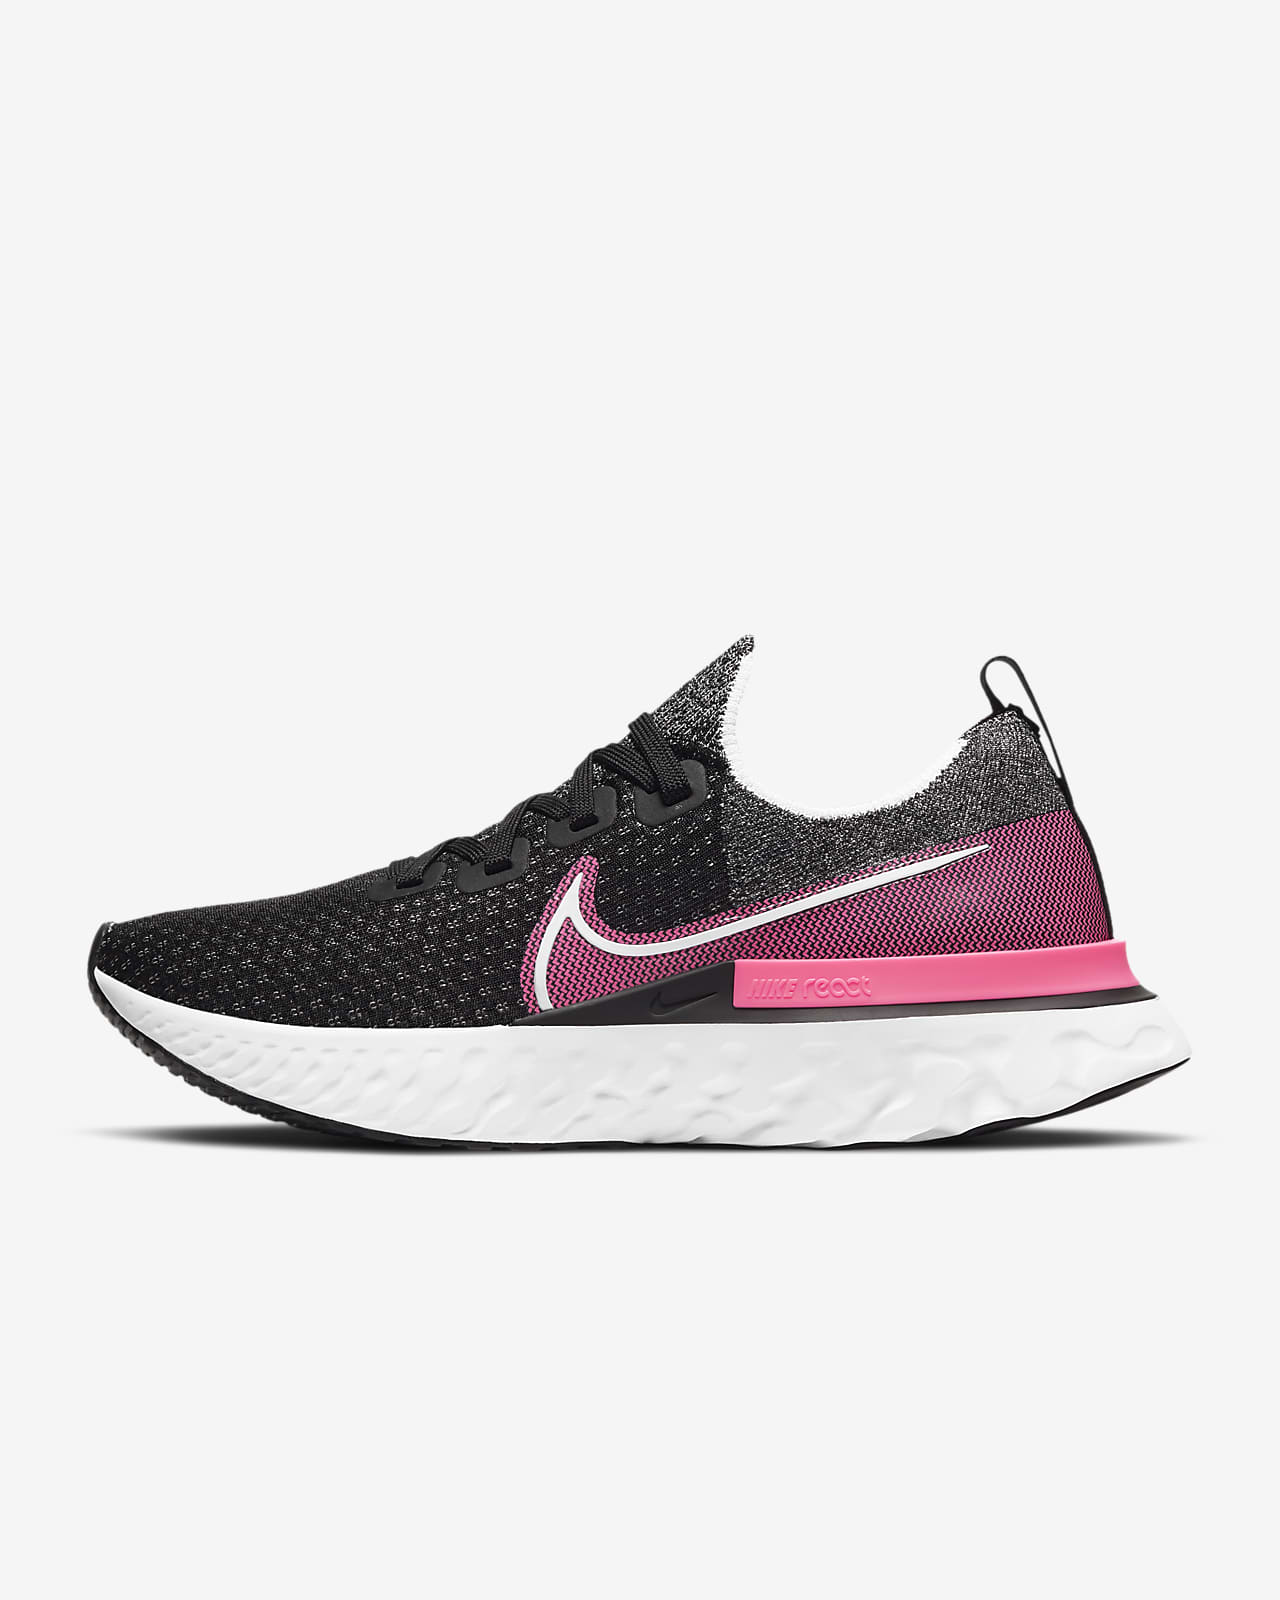 nike womens running shoes black and pink